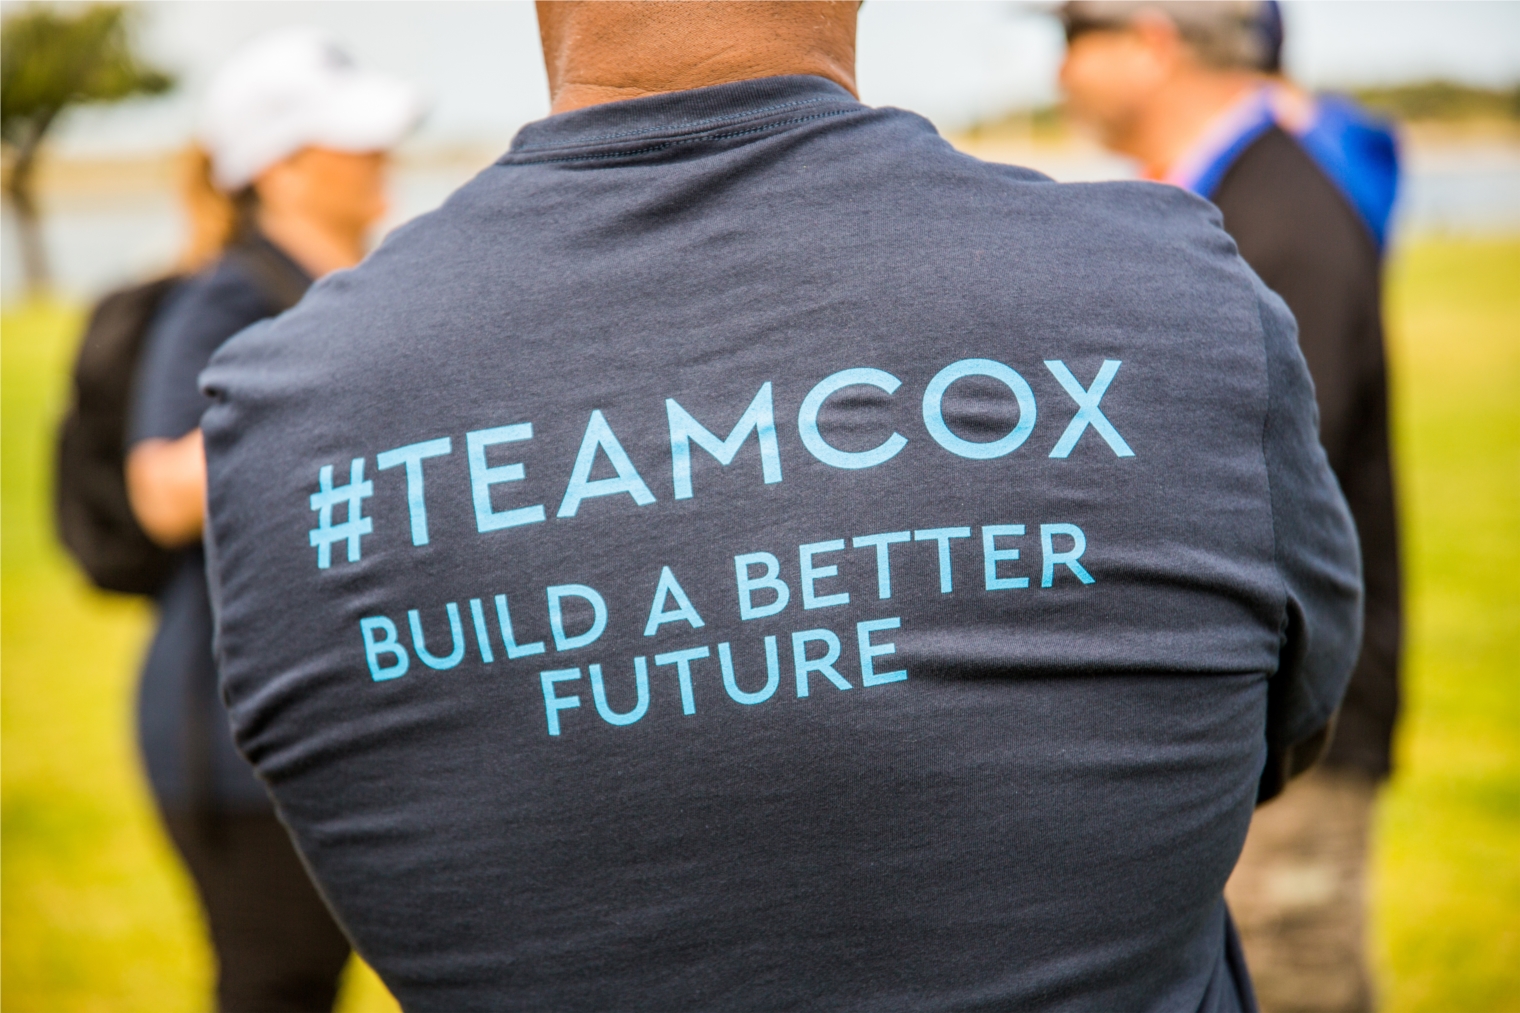 Team Cox is our enterprisewide, employee-powered volunteer force. We are thousands with one goal: Leave the world better that we found it. Team Cox’s hard work highlights that doing the right thing for the environment and our community is at the very core of who we are.